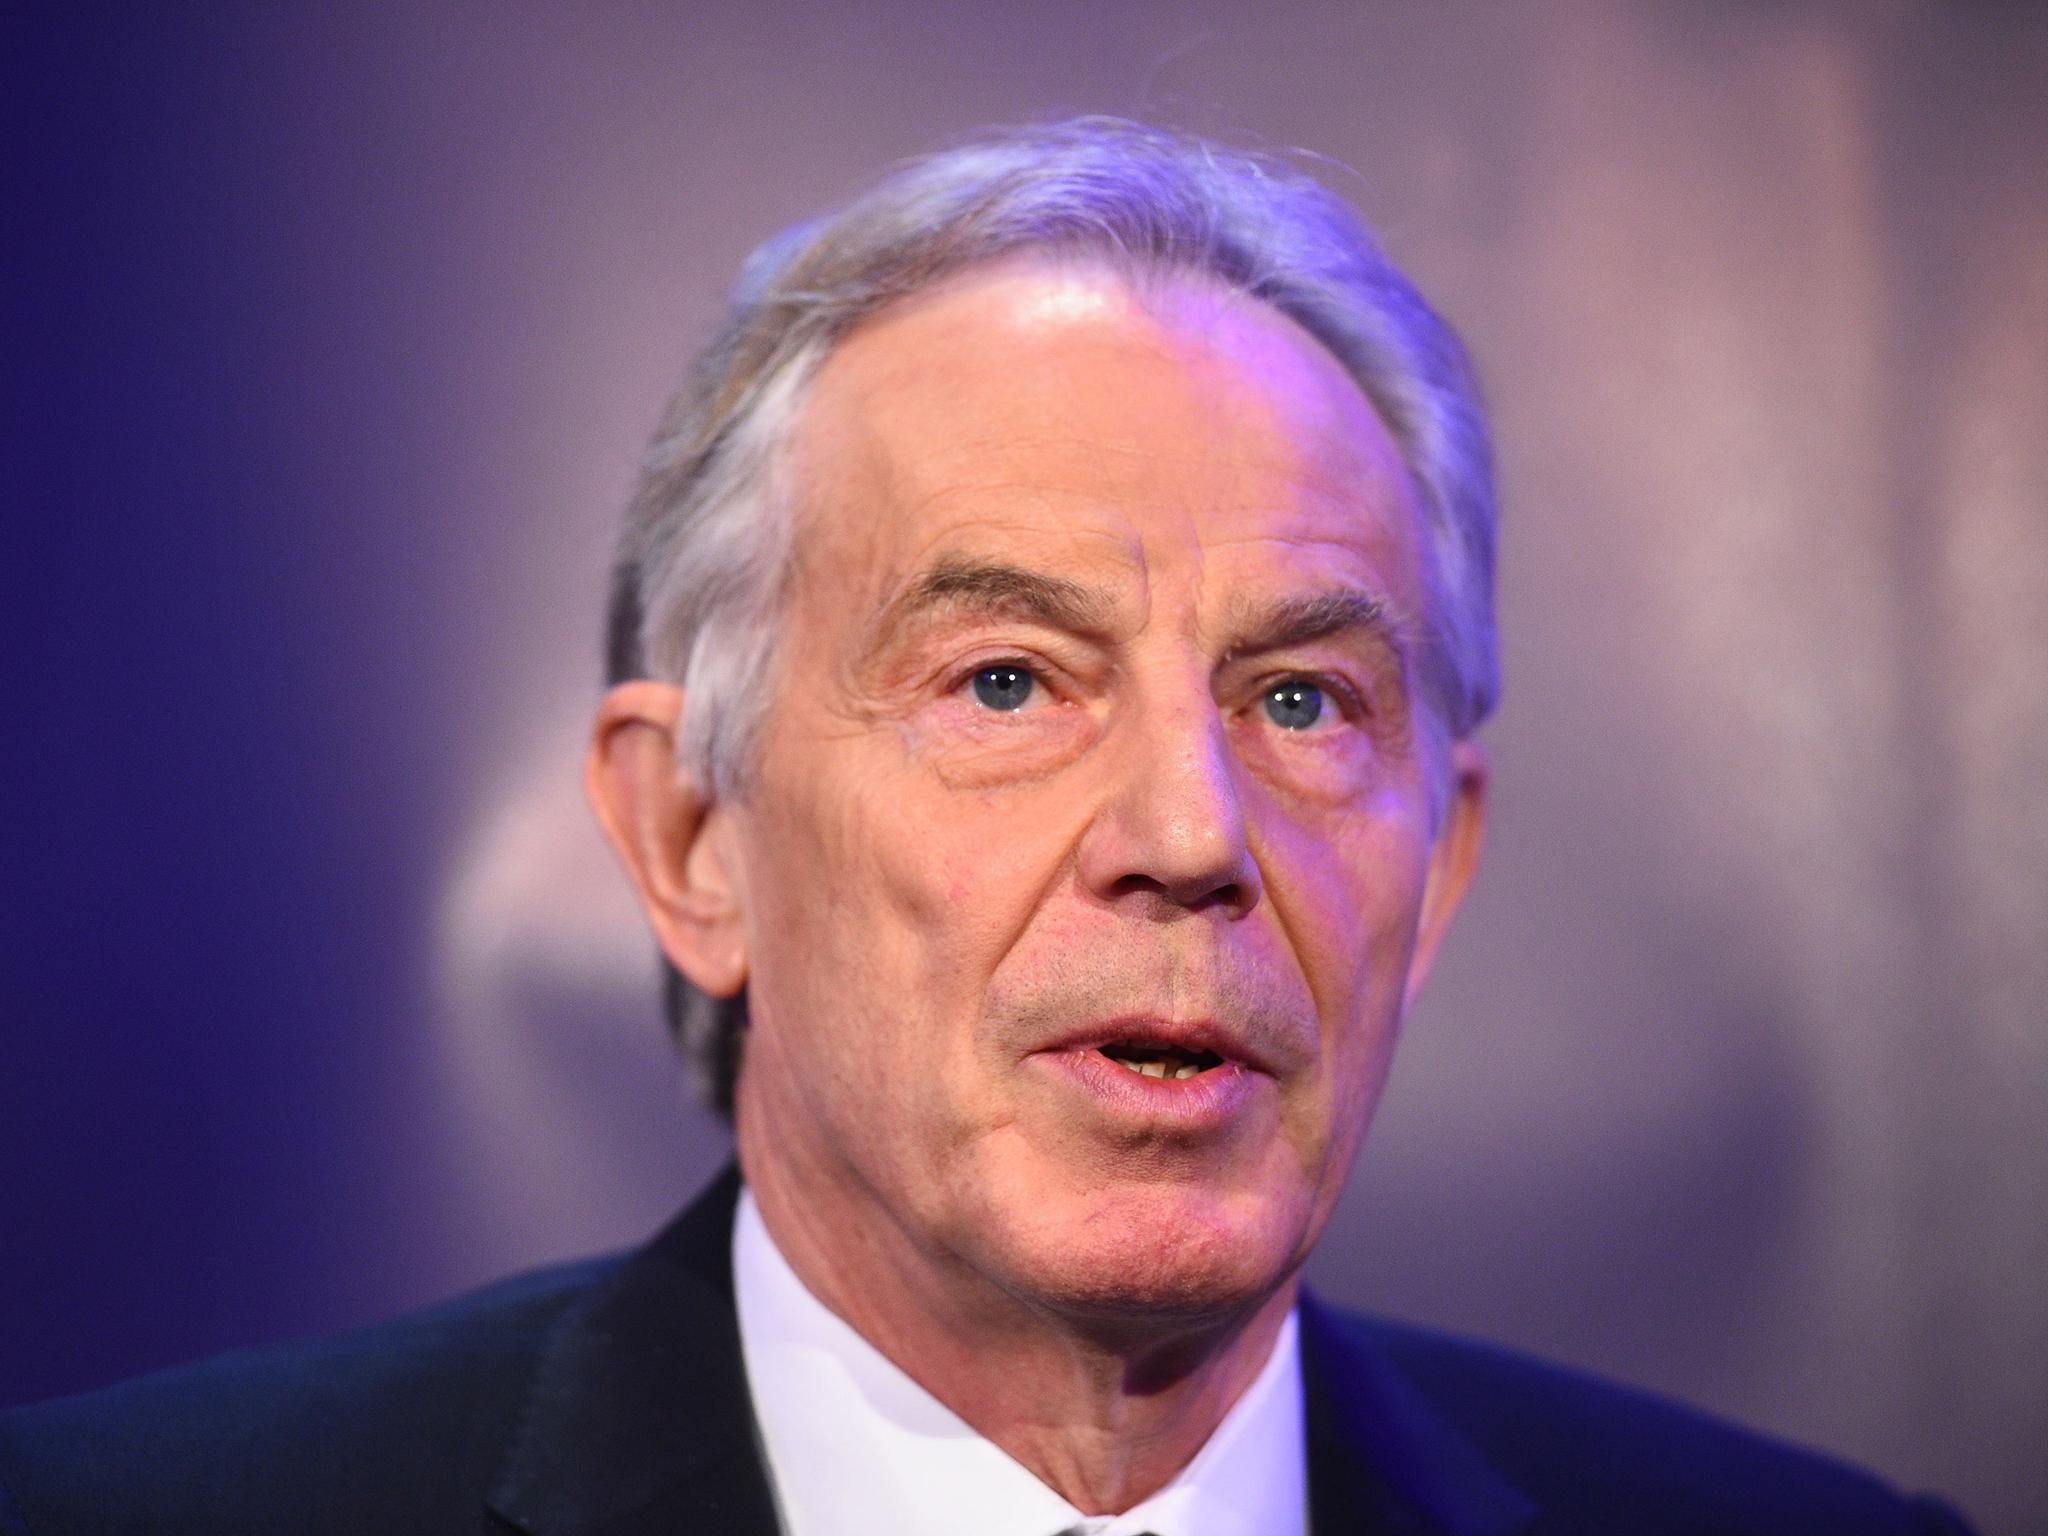 The violent crushing of unions and epochal political defeat of the left created the space for a new centre to emerge under Tony Blair